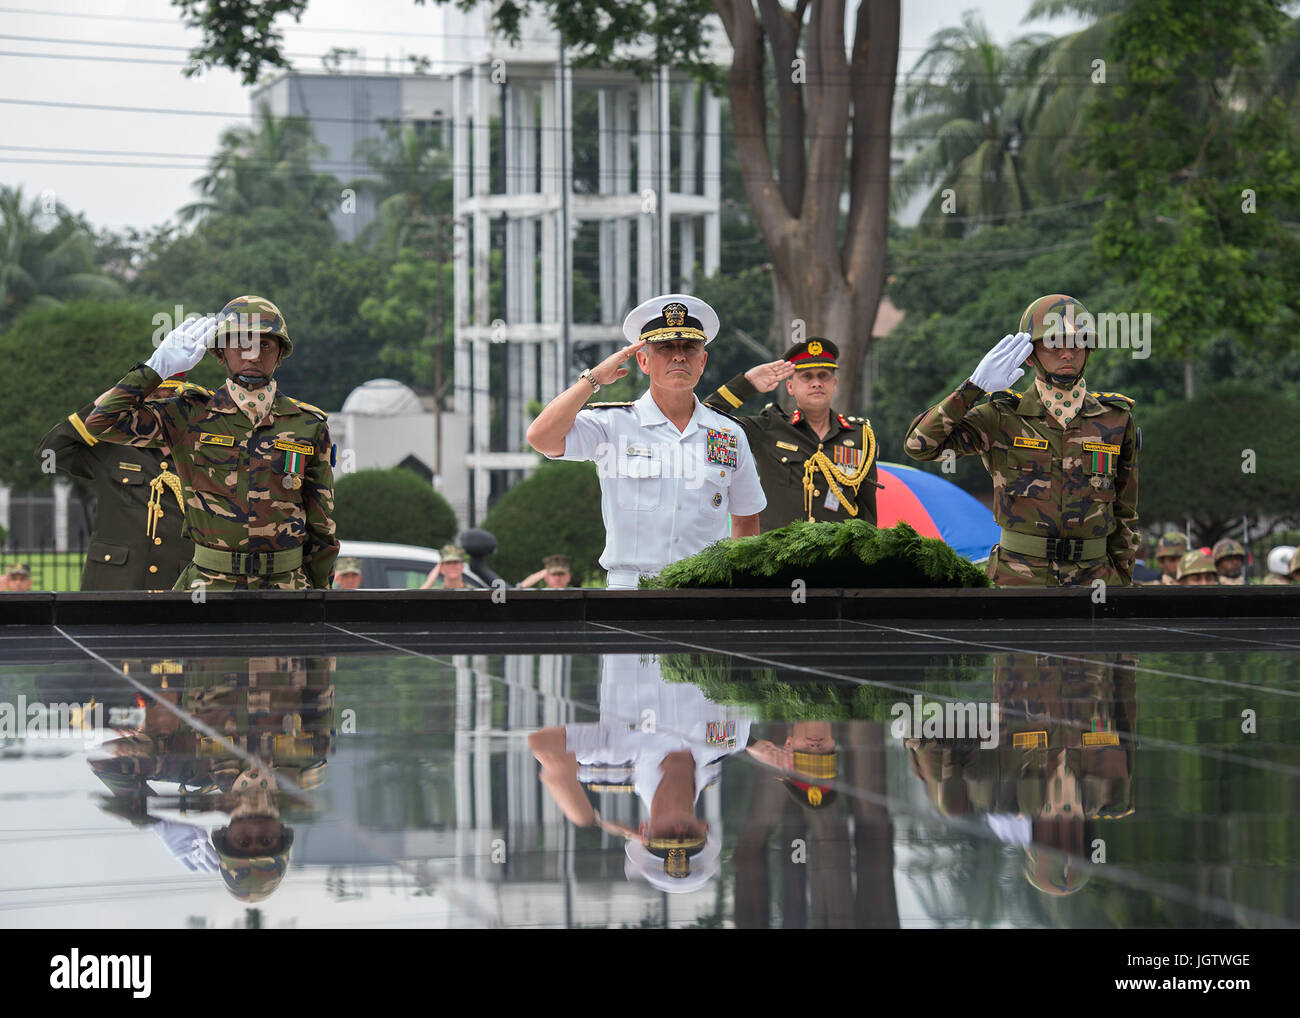 170708-N-WY954-522DHAKA, BANGLADESH (July 8, 2017) – Adm. Harry Harris, Commander U.S. Pacific Command (PACOM), and members of the Bangladesh Army render a salute during a wreath laying ceremony at the Skikha Anirban eternal flame to honor those who sacrificed their lives for Bangladesh’s liberation in 1971. This is Harris’ first visit to Bangladesh as PACOM commander. During the visit he met with counterparts and government officials for discussions on military cooperation and regional security initiatives in the Indo-Asia Pacific. (U.S. Navy photo by Mass Communications Specialist 2nd Class  Stock Photo